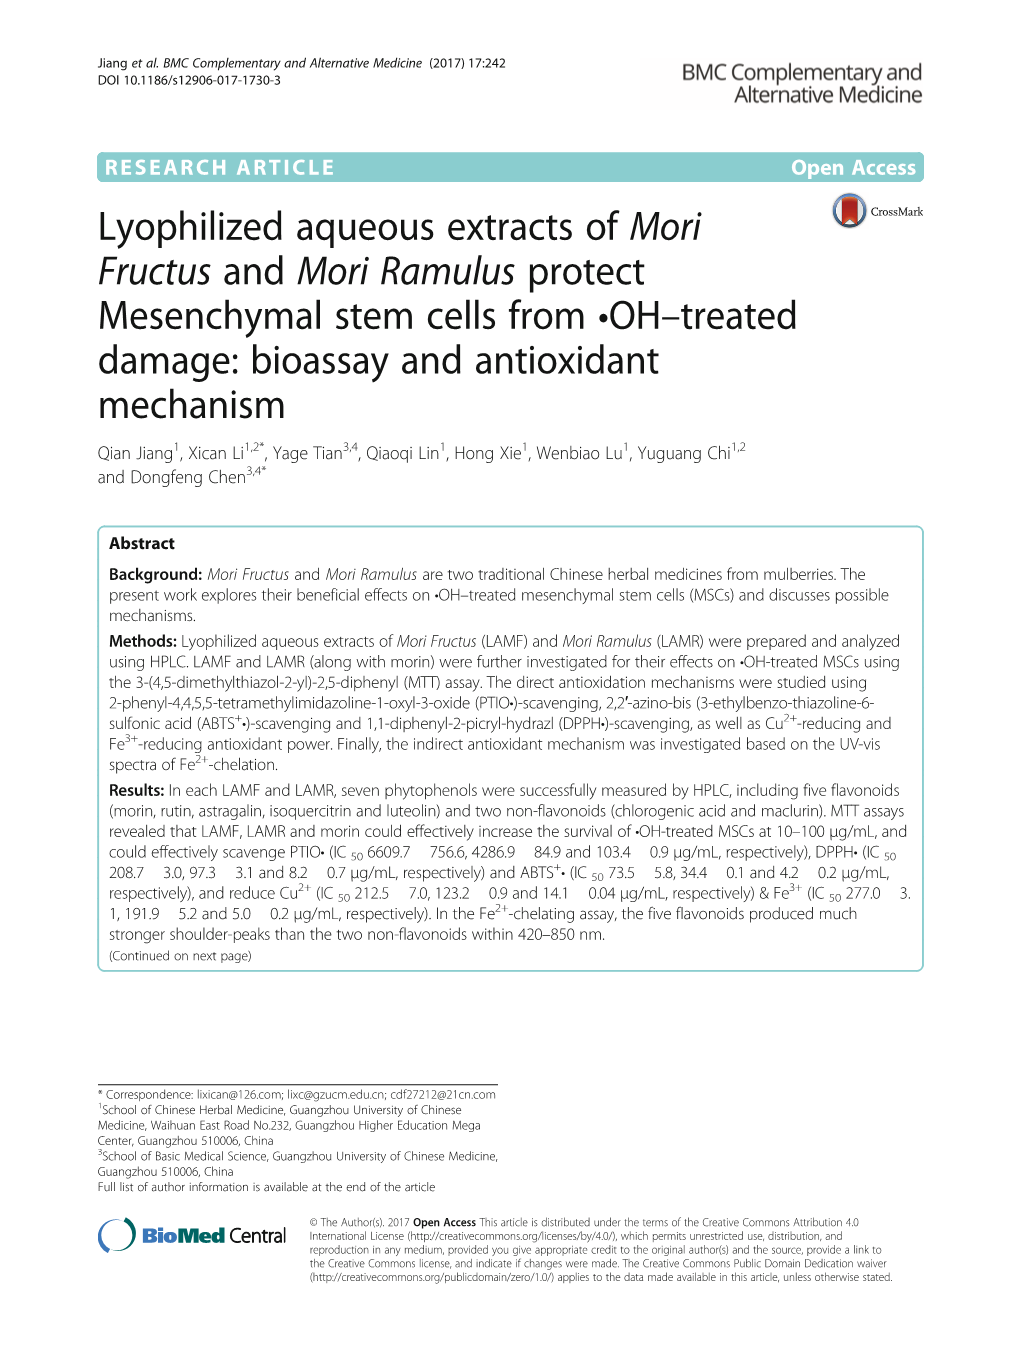 Lyophilized Aqueous Extracts of Mori Fructus and Mori Ramulus Protect